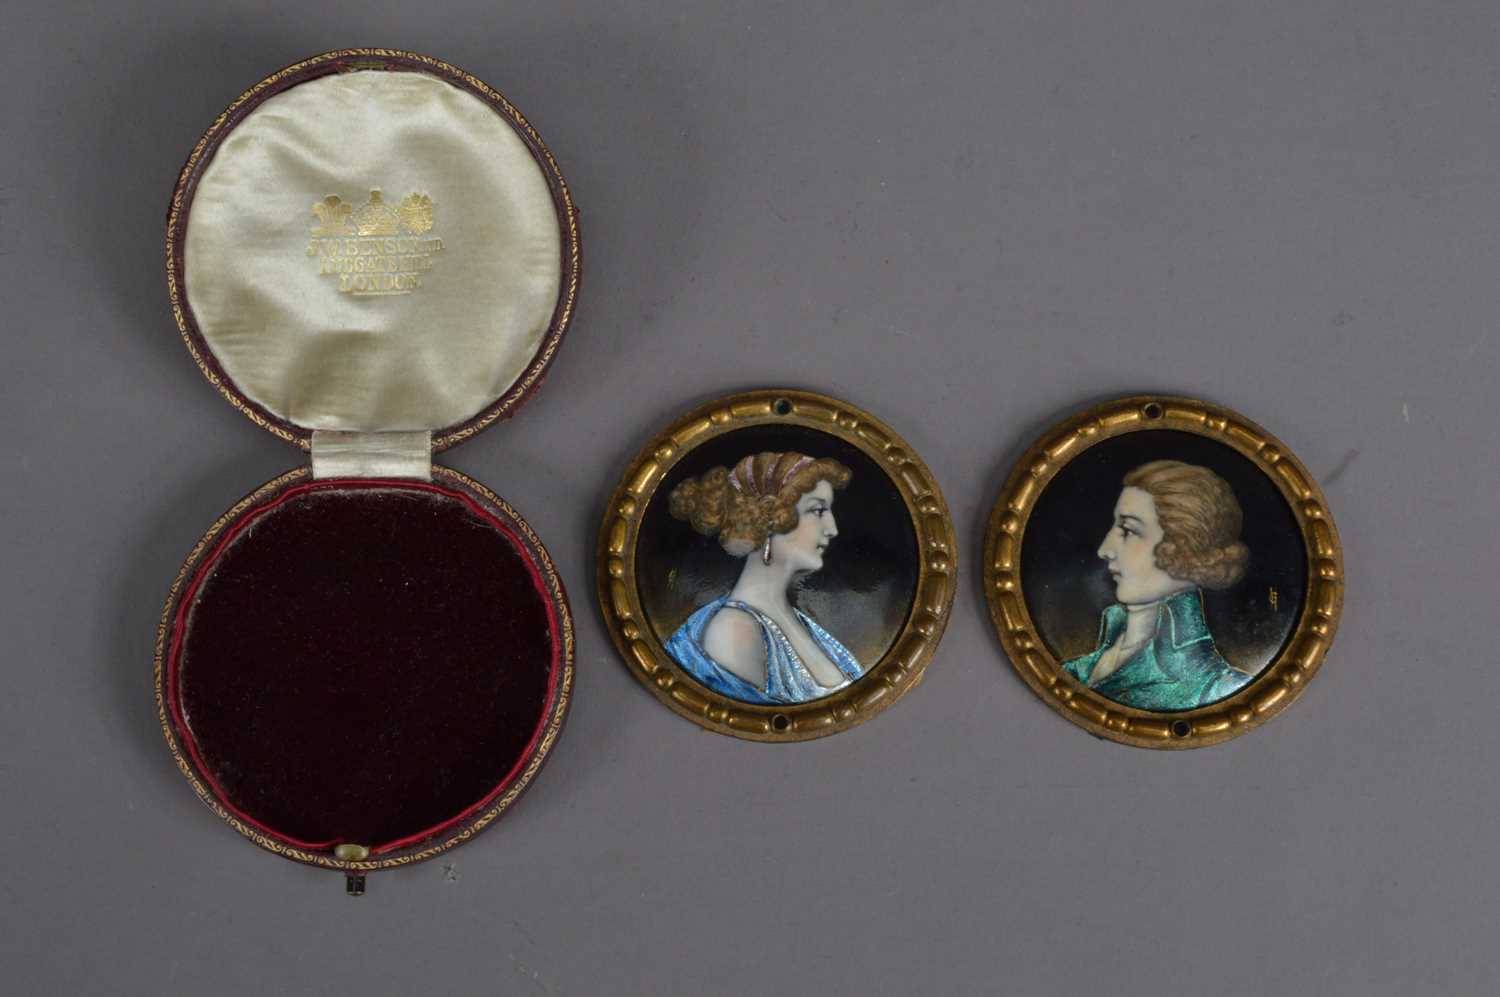 Lot 126 - Two late 19th or early 20th century copper enamelled portrait miniatures